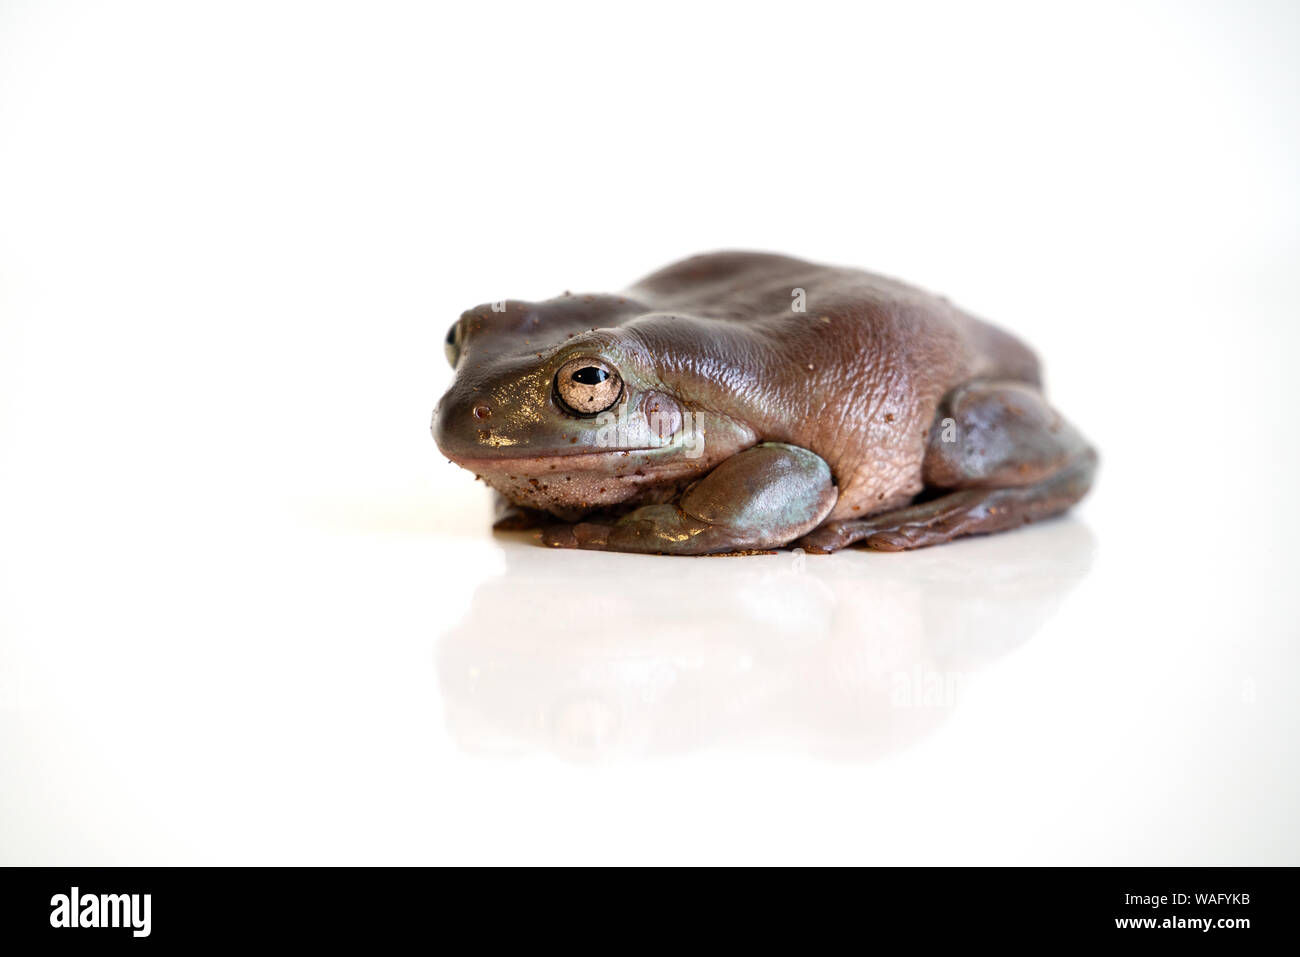 Brown Australian Litoria frog on white background with reflection Stock Photo